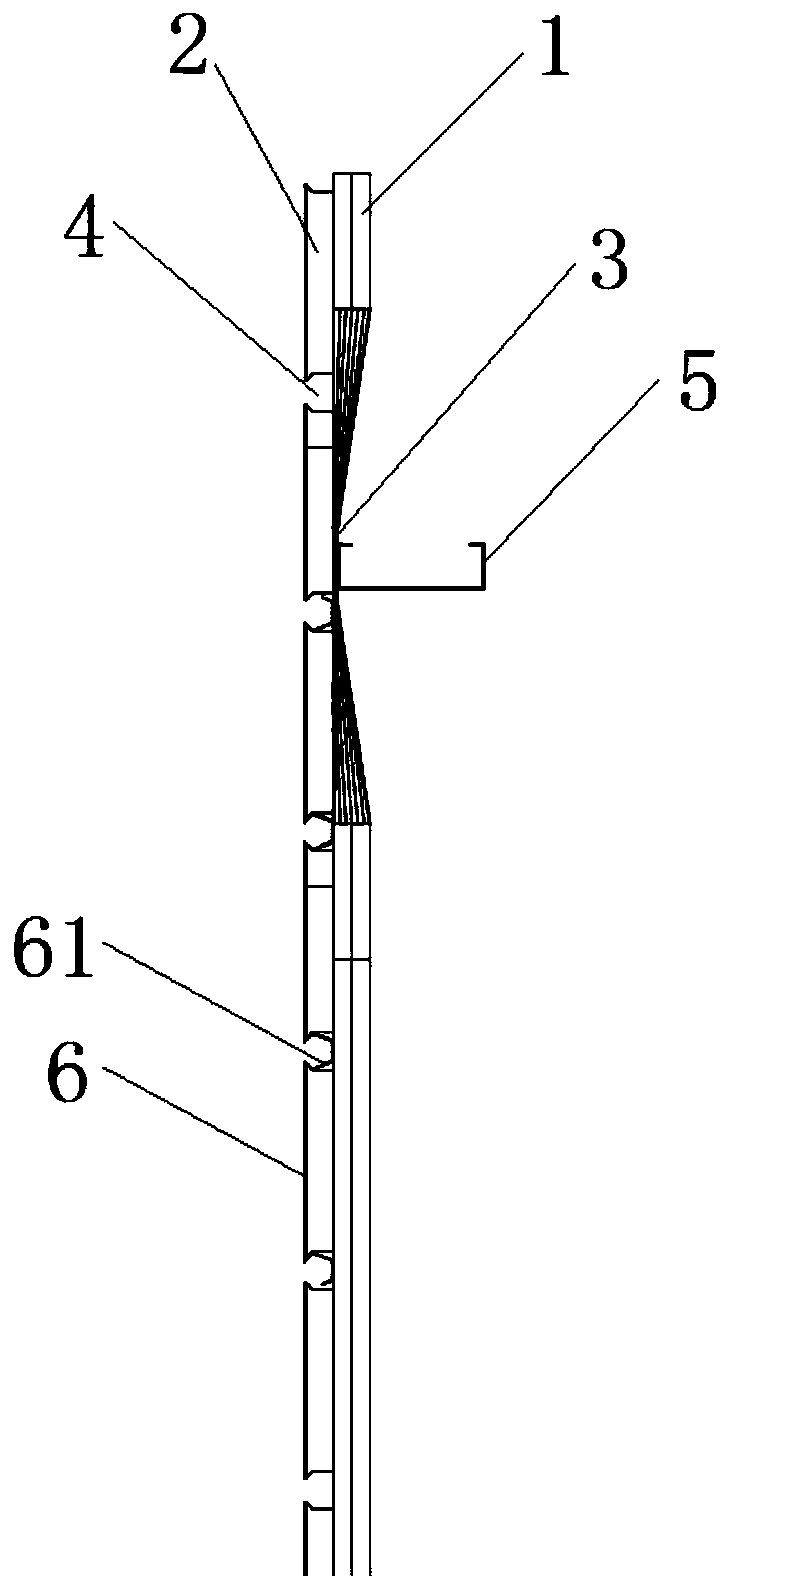 Variable-section keel